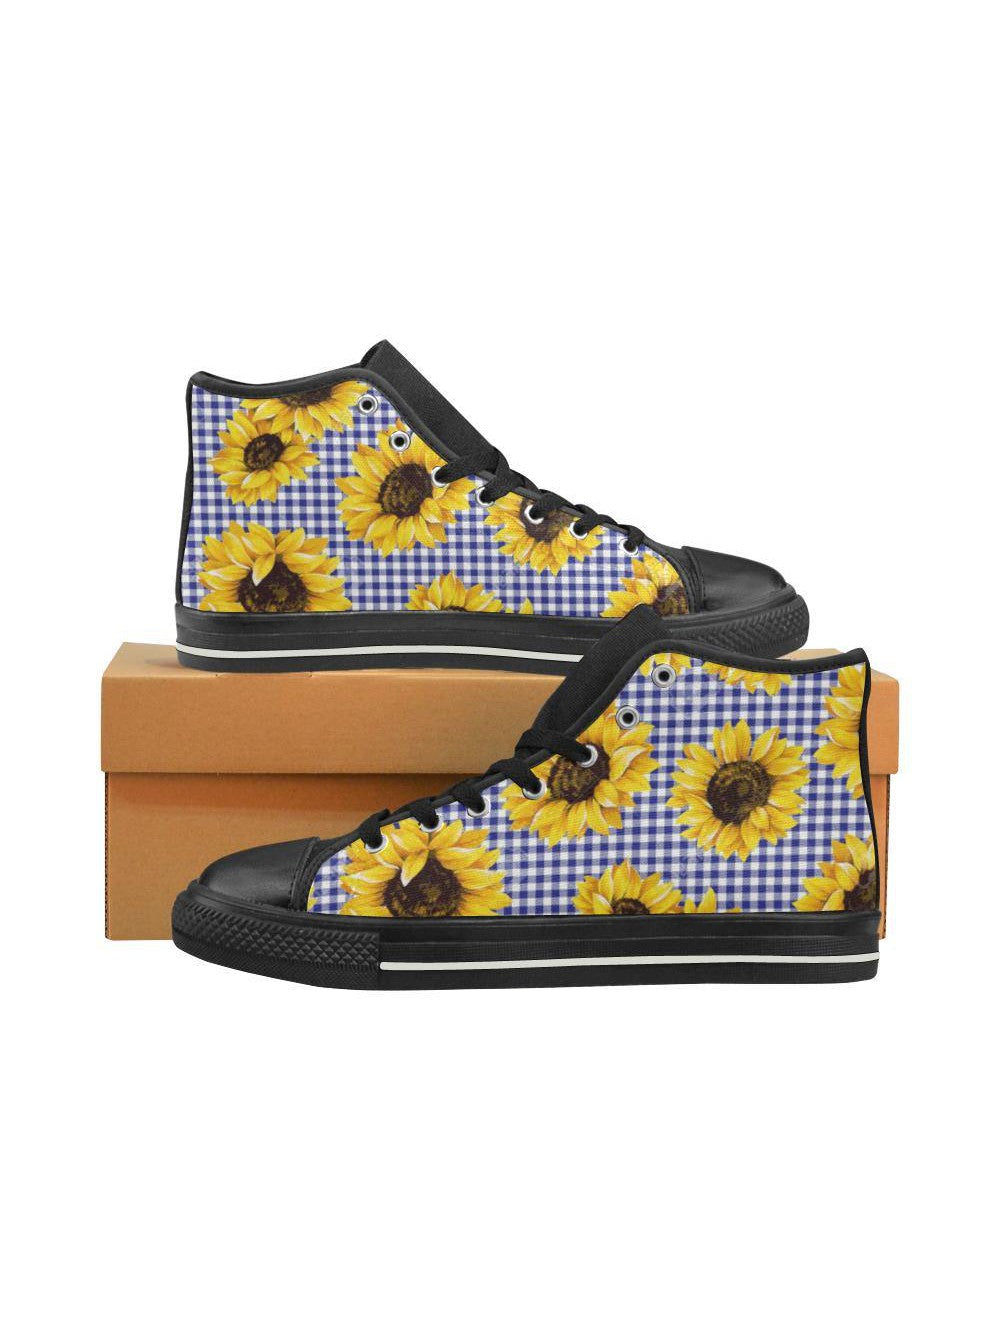 SUNFLOWERS GINGHAM High Top Canvas Kid's Shoes